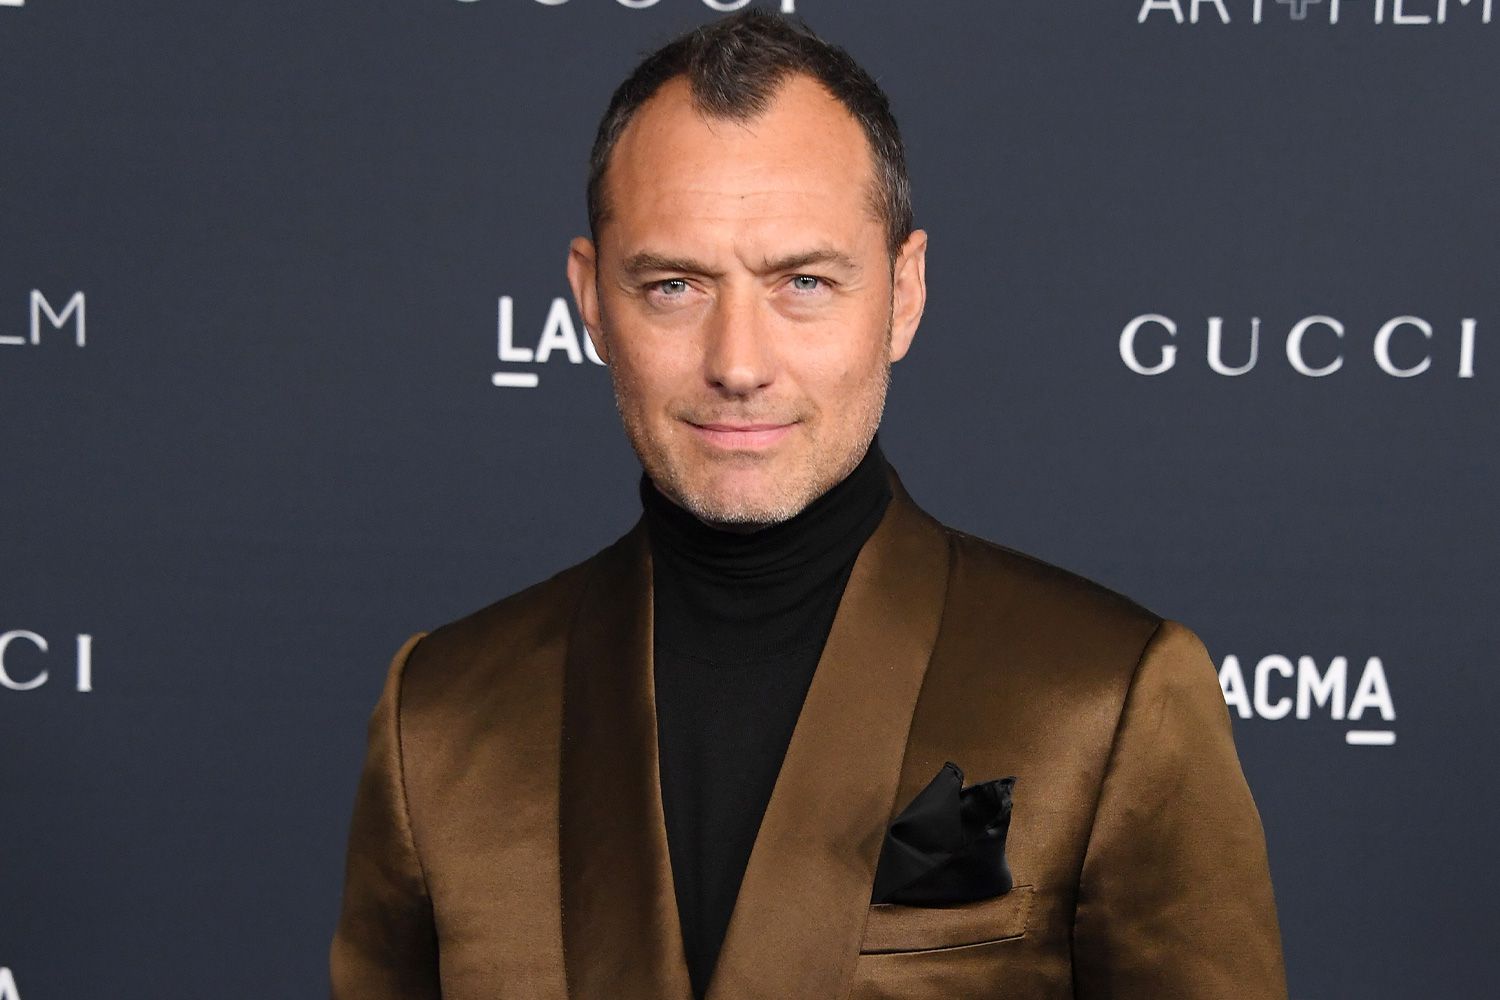 Jude Law Biography: Wife, Movies, Age, Children, Net Worth, TV Shows, Instagram, Siblings, Height, Nationality